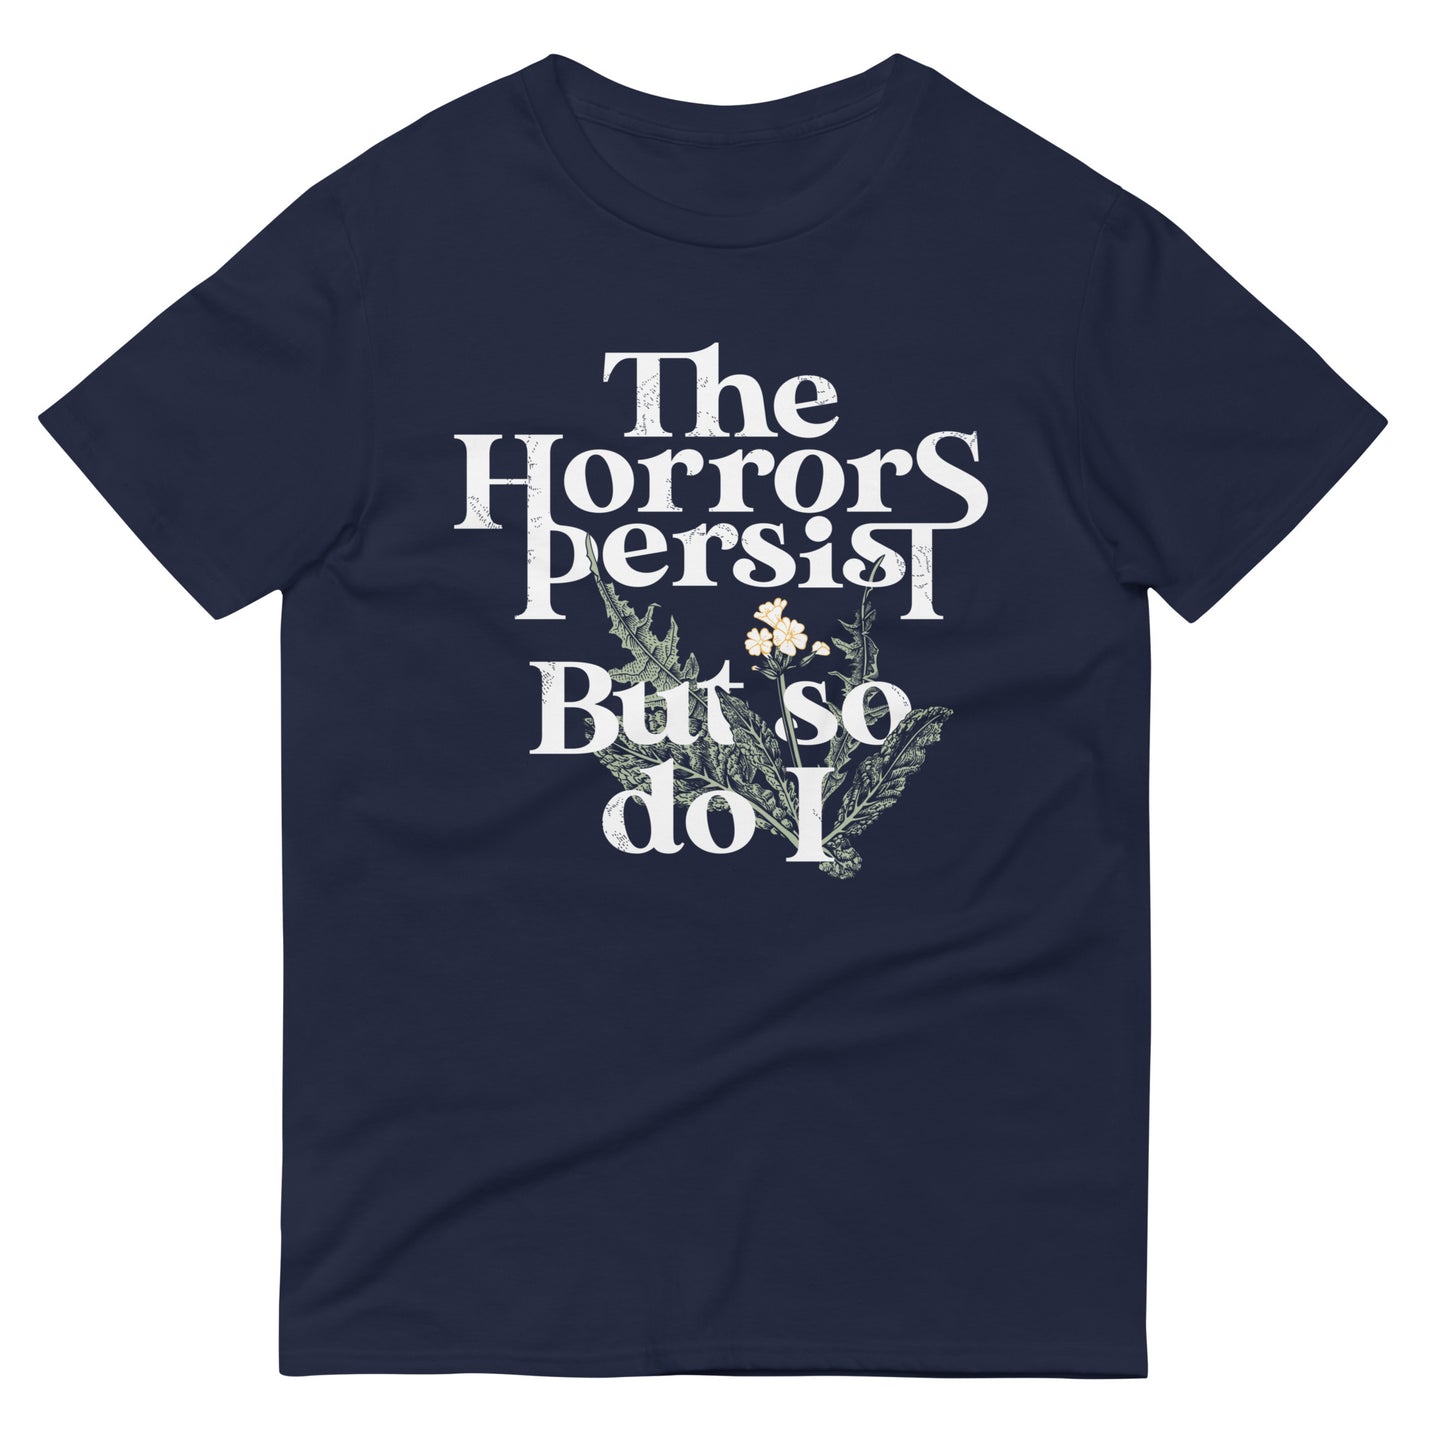 The Horrors Persist But So Do I Men's Signature Tee